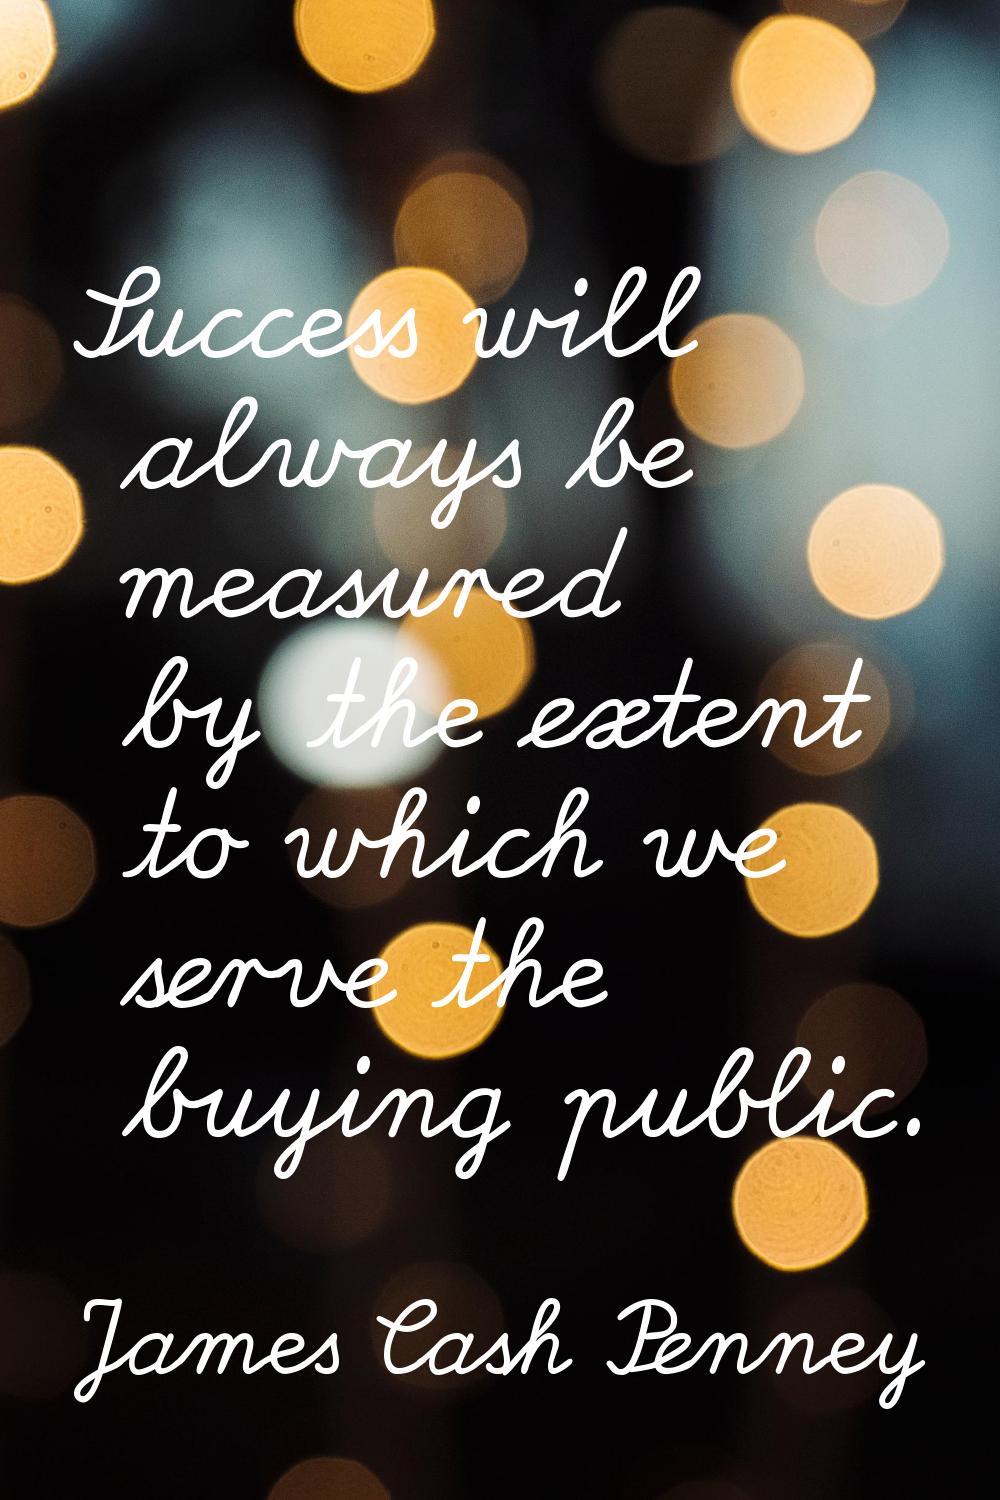 Success will always be measured by the extent to which we serve the buying public.